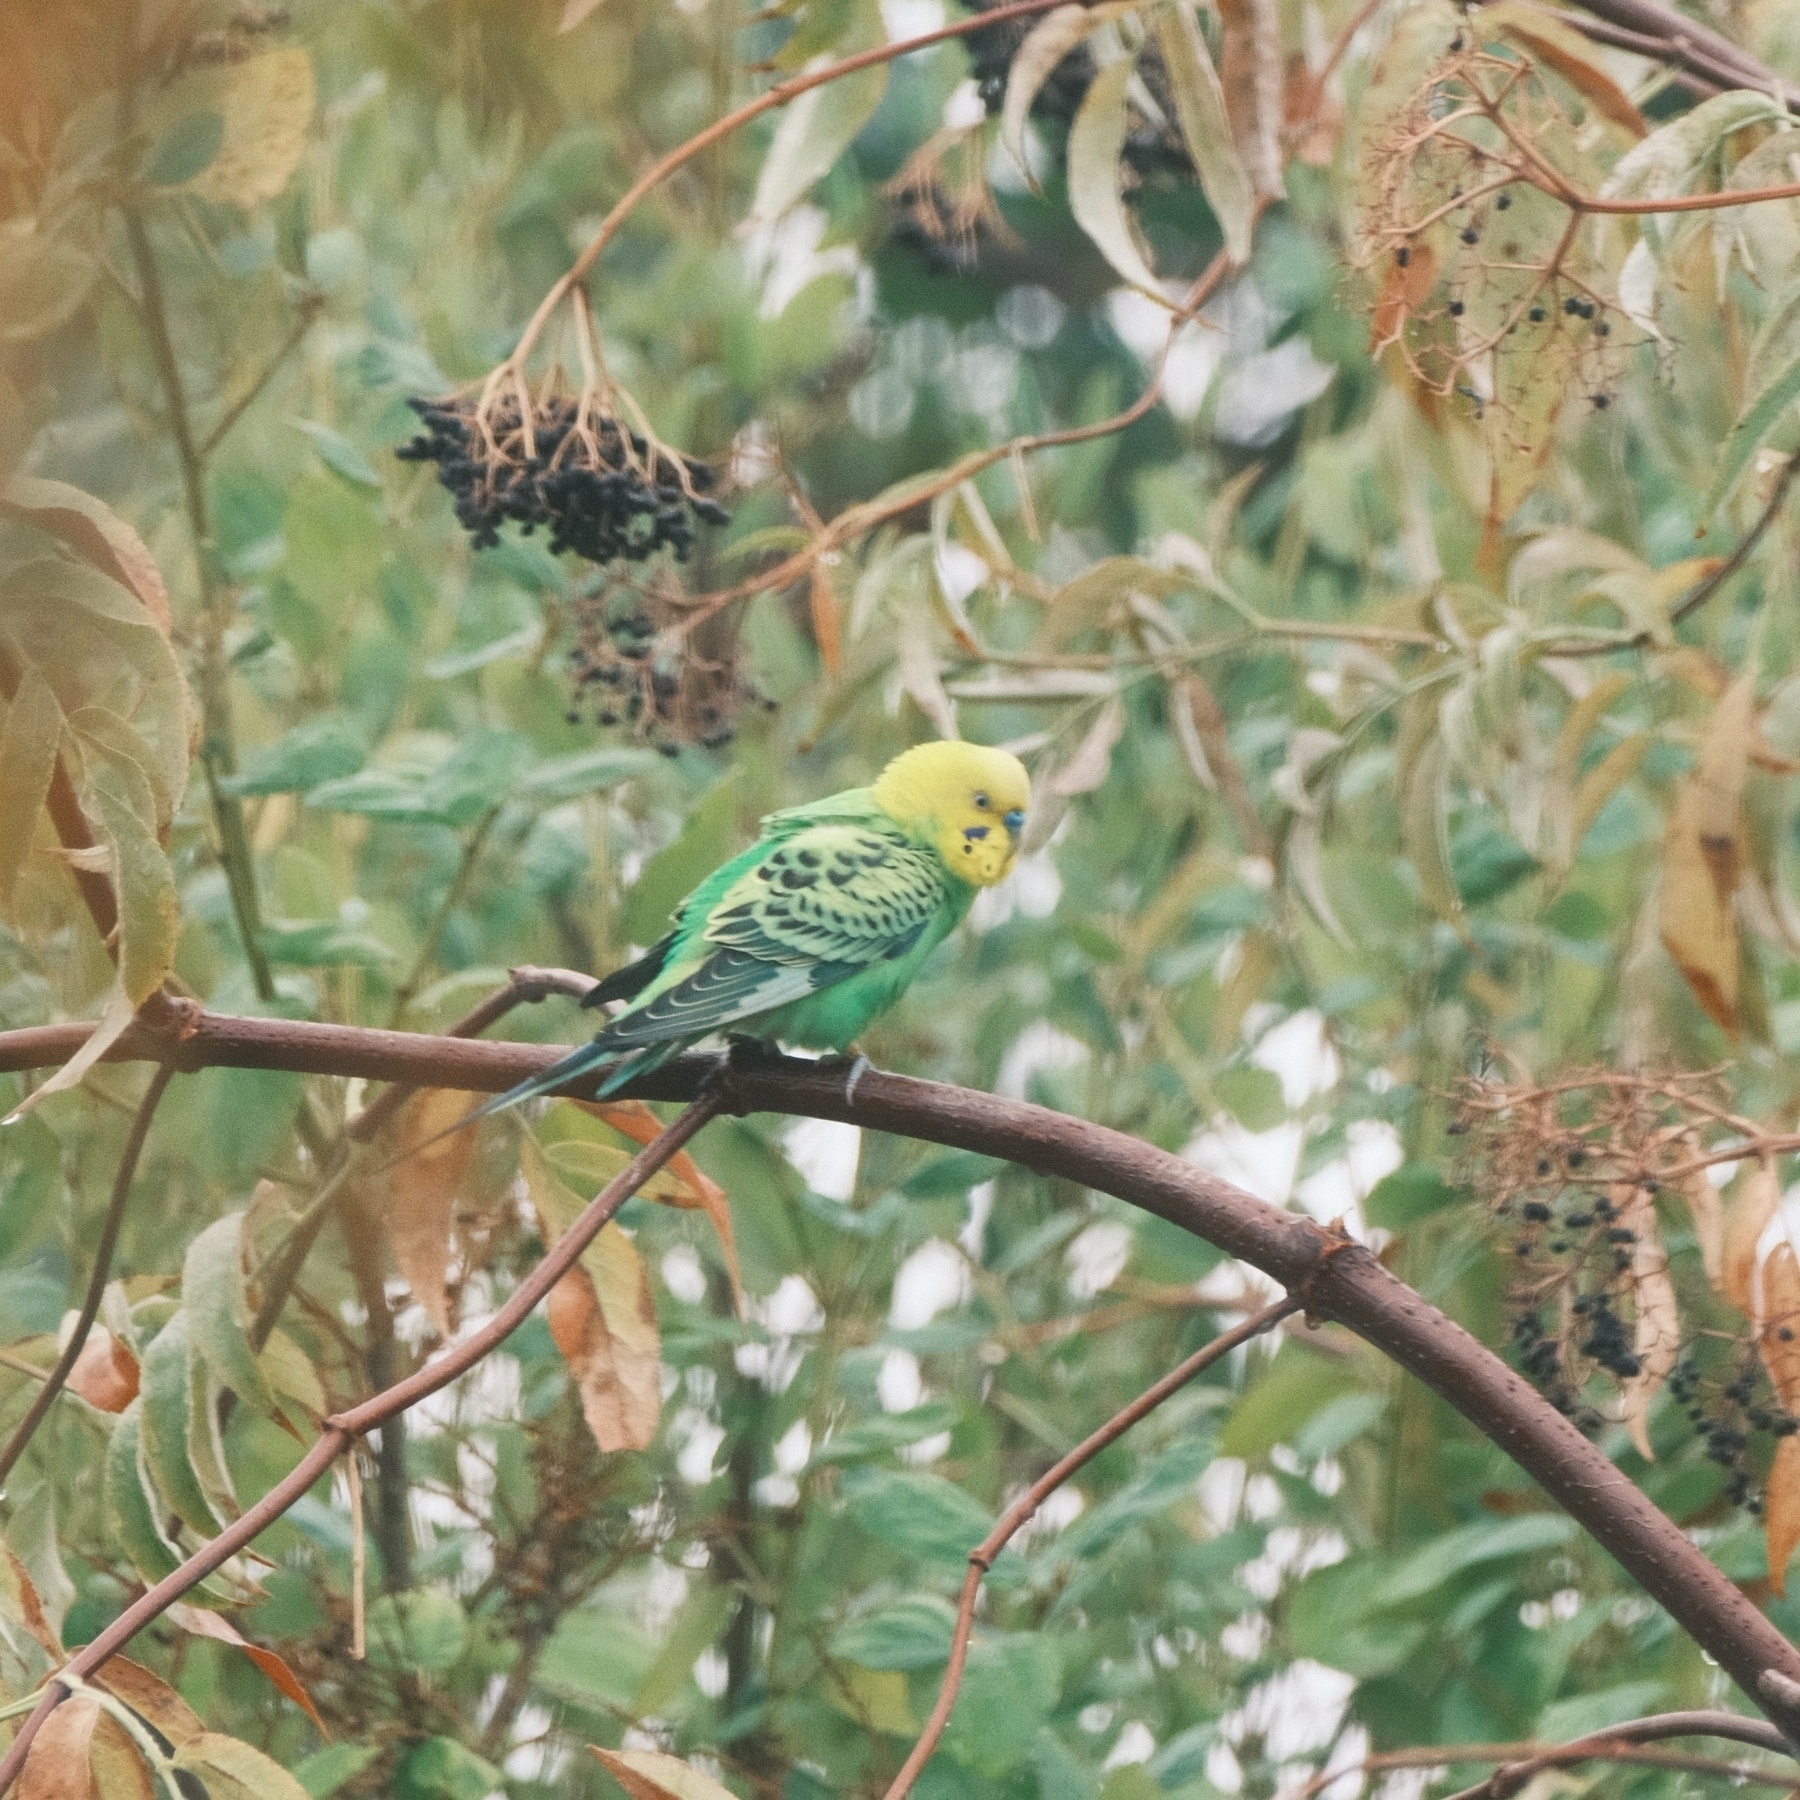 A bird with a green body and yellow head perched on an elderberry branch. It has black markings on its wings and tail. There are elderberries behind it.